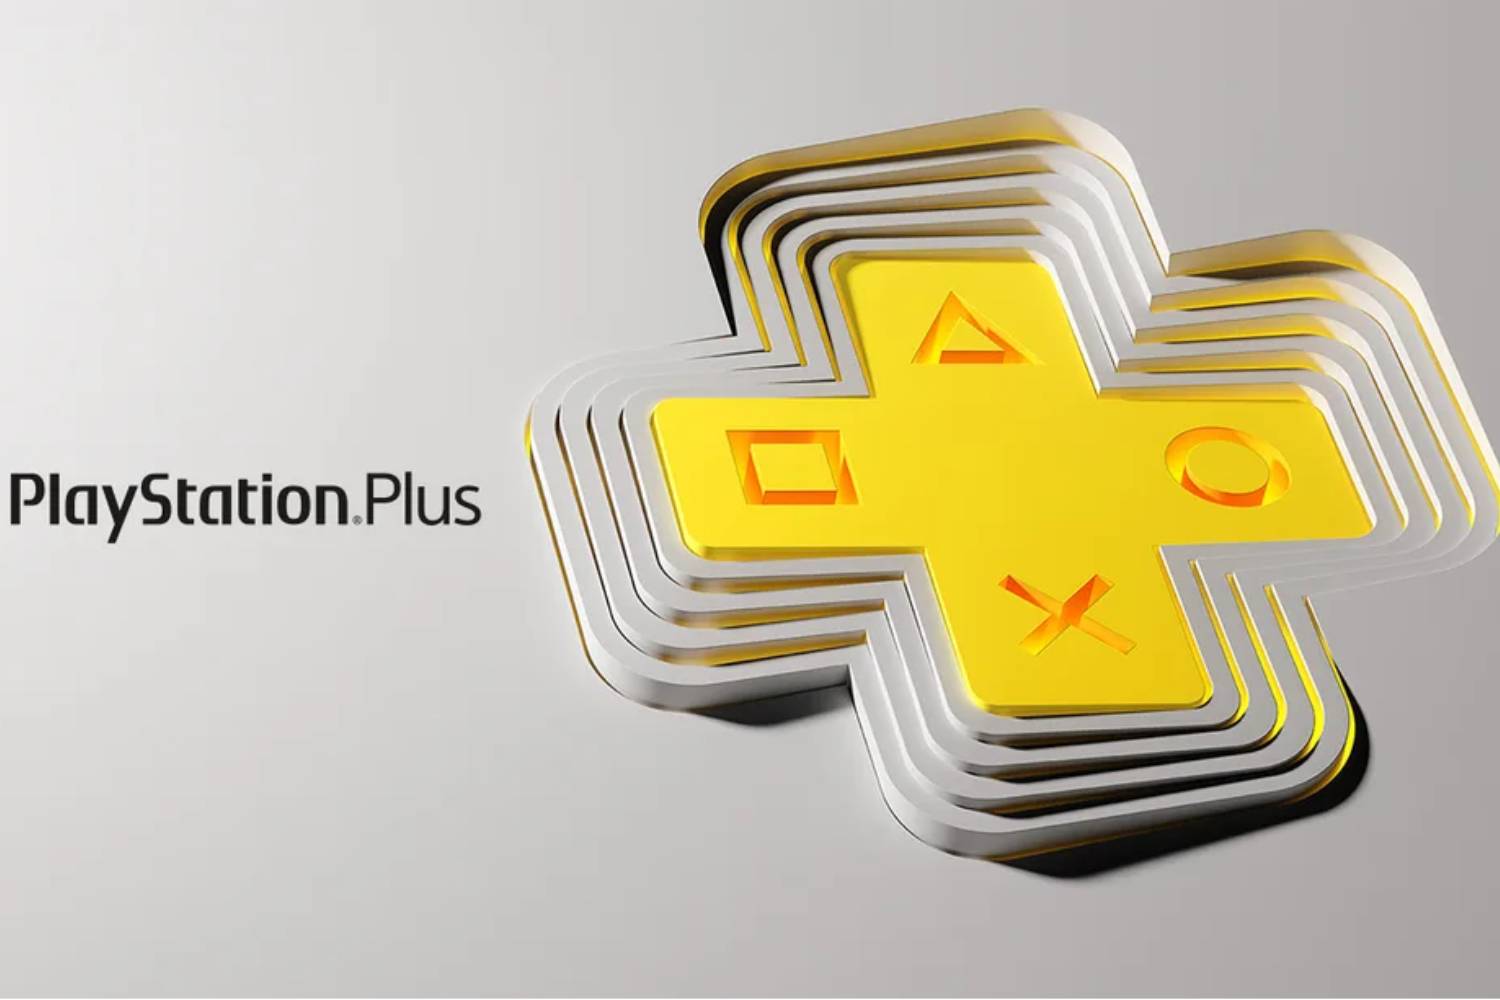 PlayStation Plus: everything you need to know about Sony's